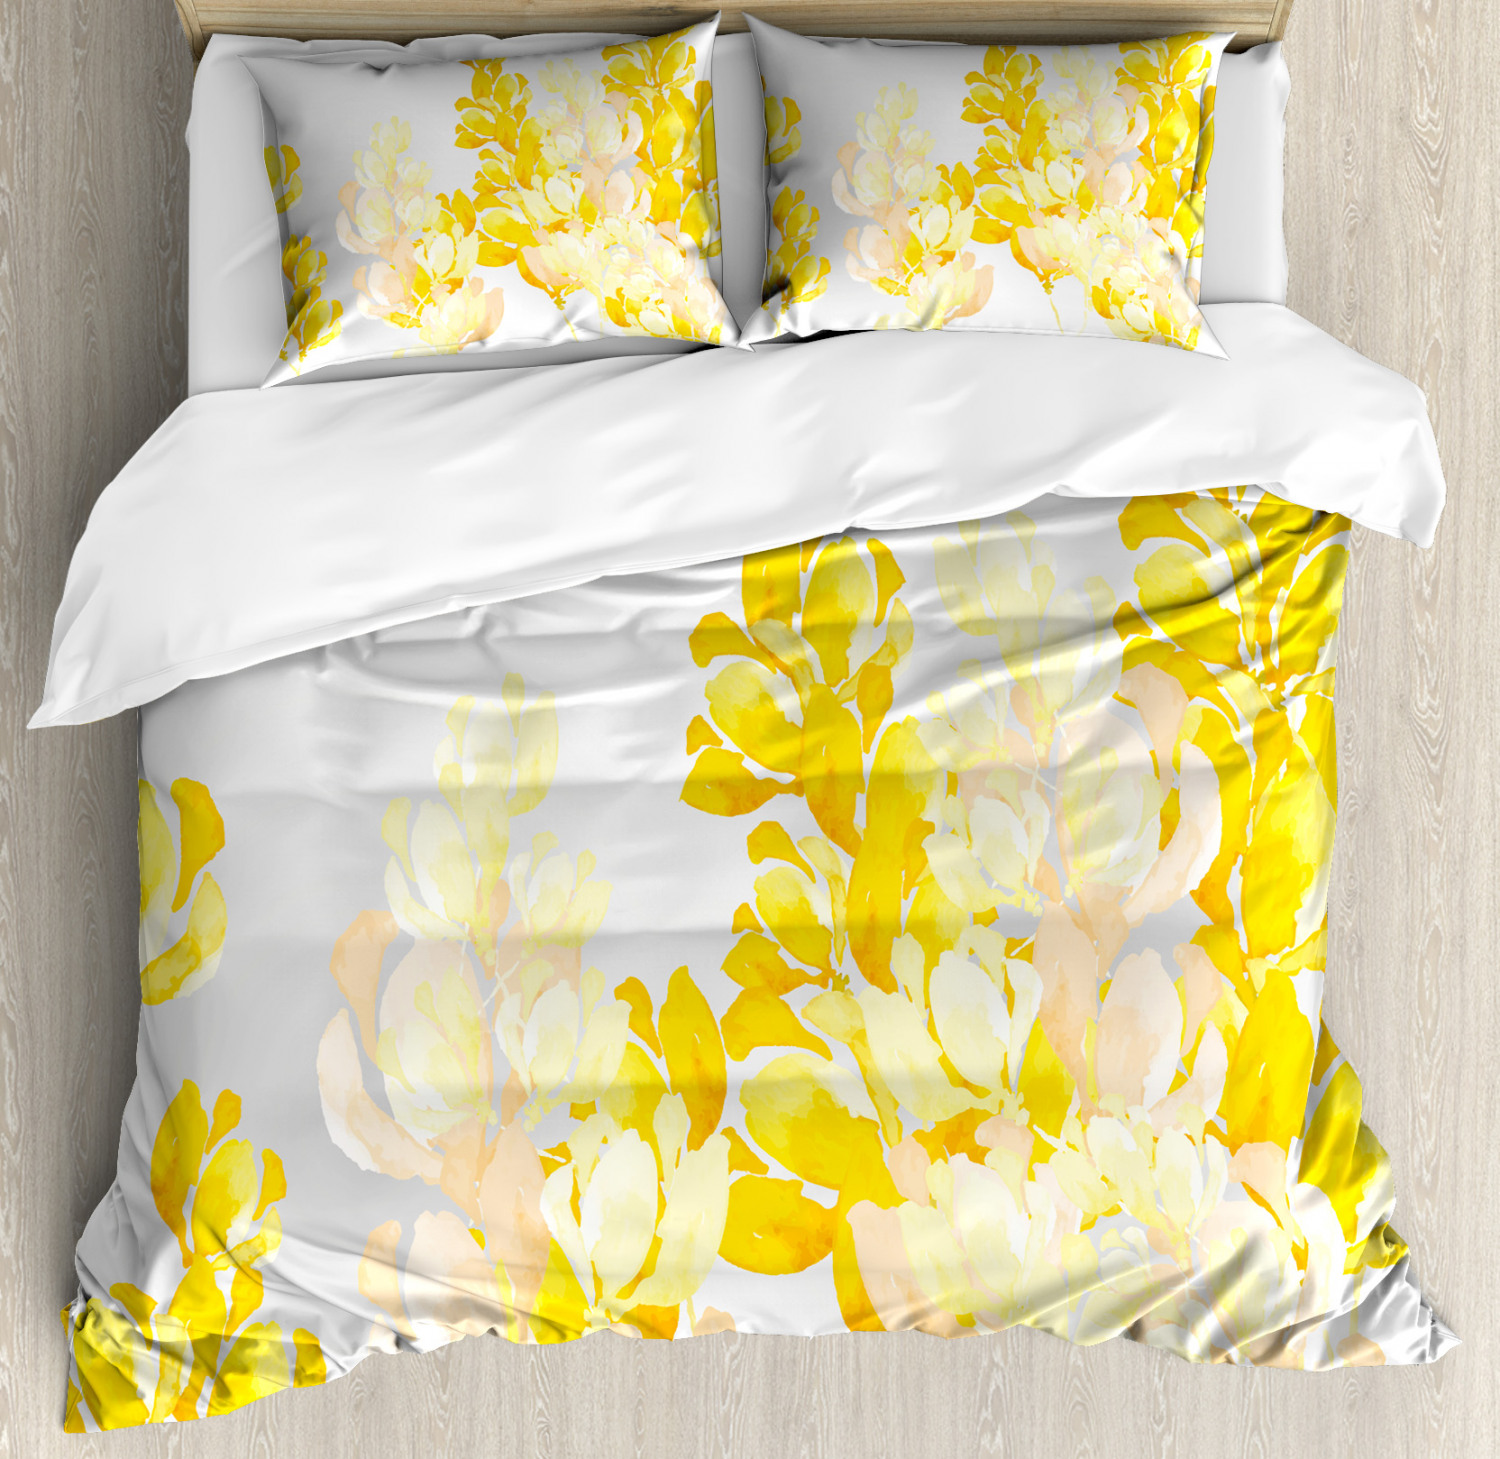 Yellow And White Duvet Cover Set With Pillow Shams Wild Flowers